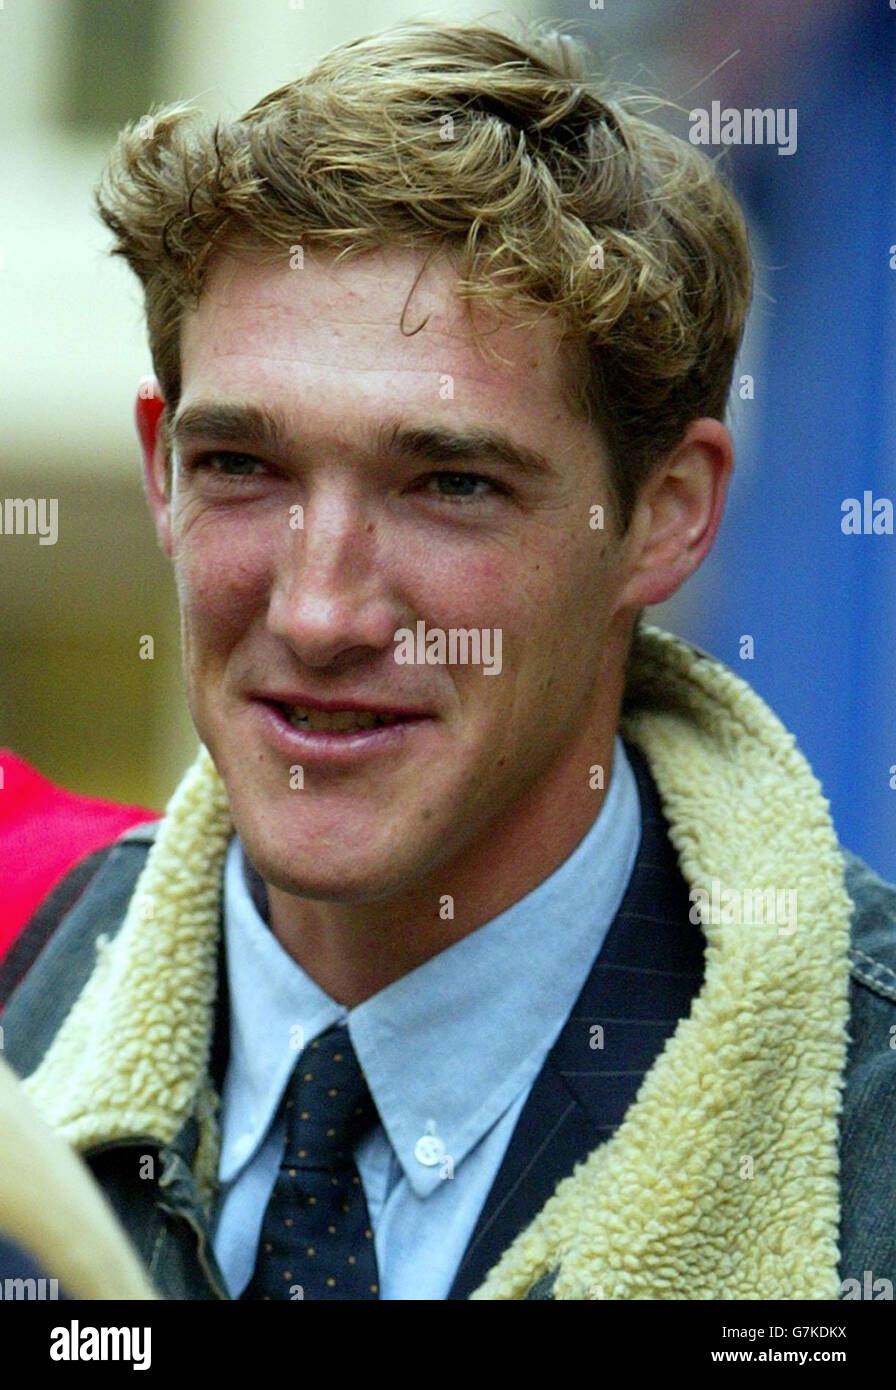 Polo player Luke Tomlinson who appeared charged under section 5 of the Public Order Act after entering the House of Commons chamber during a debate on a Bill to ban fox-hunting, along with seven others. All eight protesters denied charges of disorderly conduct and were granted unconditional bail. Stock Photo